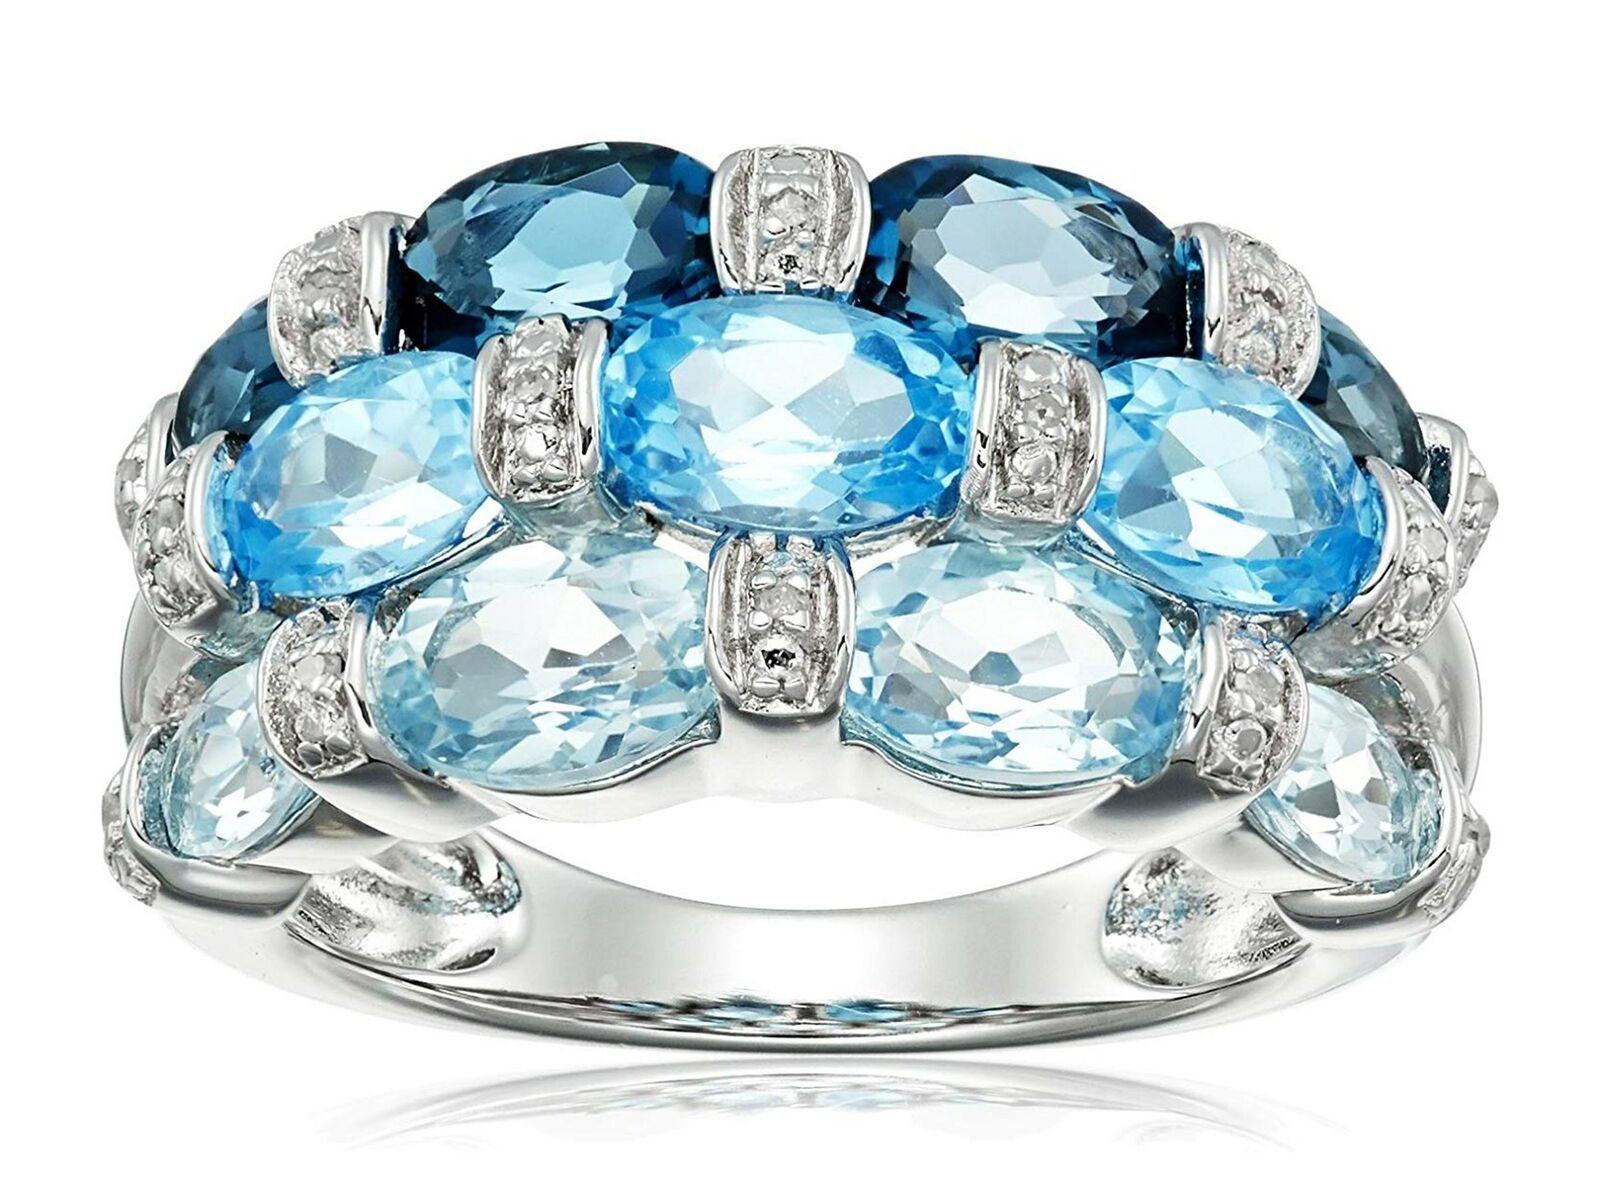 Natural Mixed Blue Topaz Ring with Diamonds in Sterling Silver